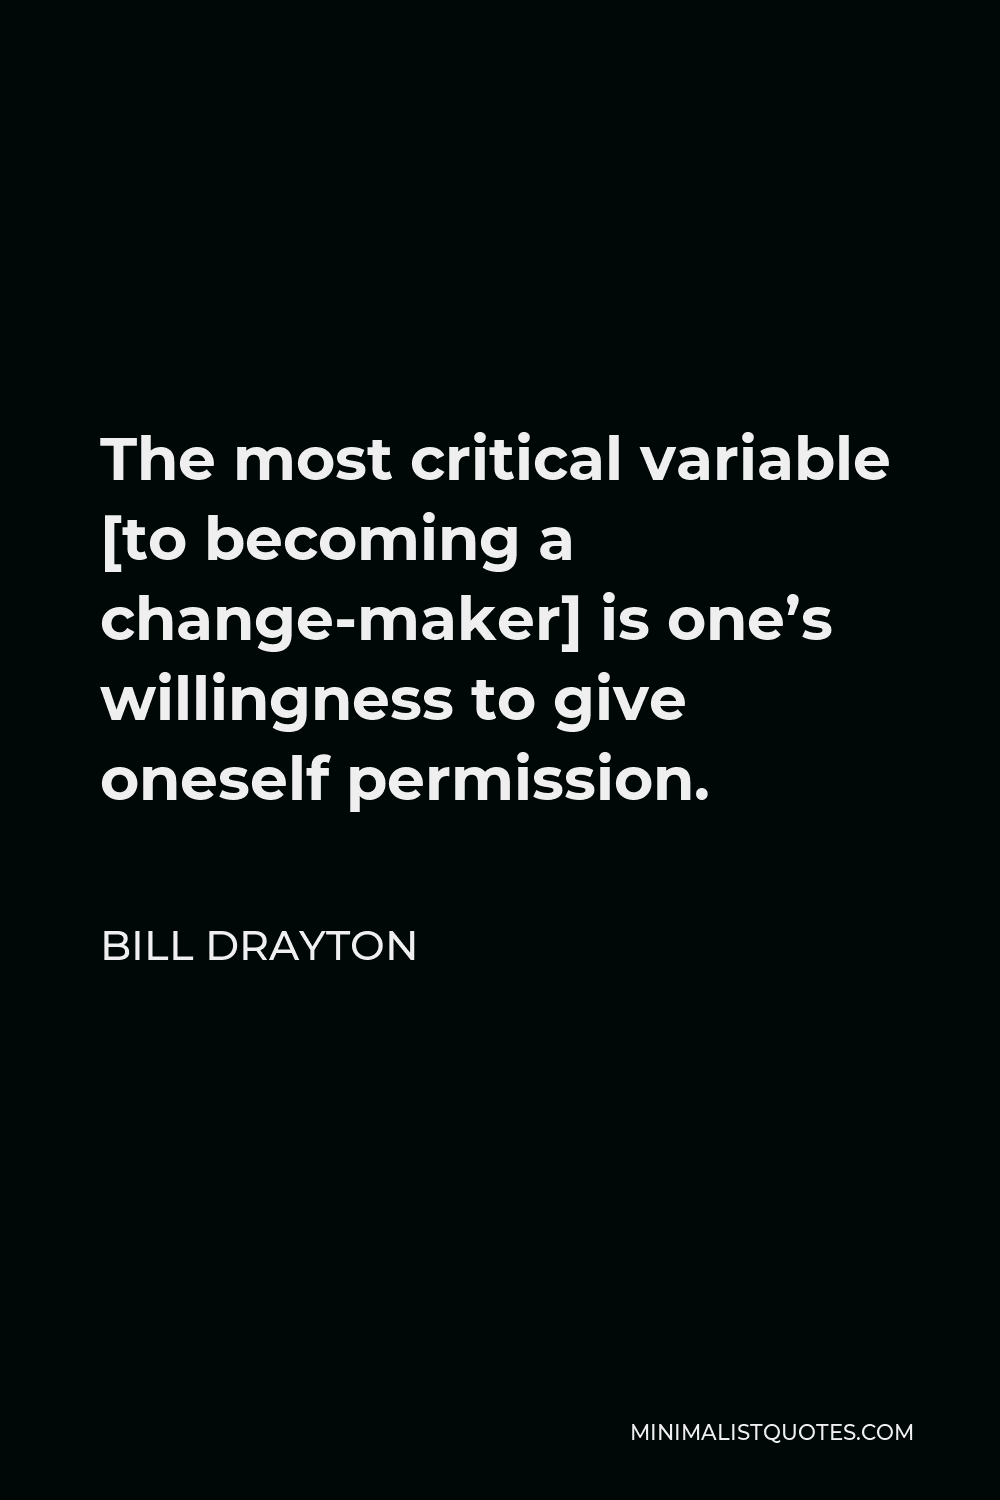 Bill Drayton Quote - The most critical variable [to becoming a change-maker] is one’s willingness to give oneself permission.